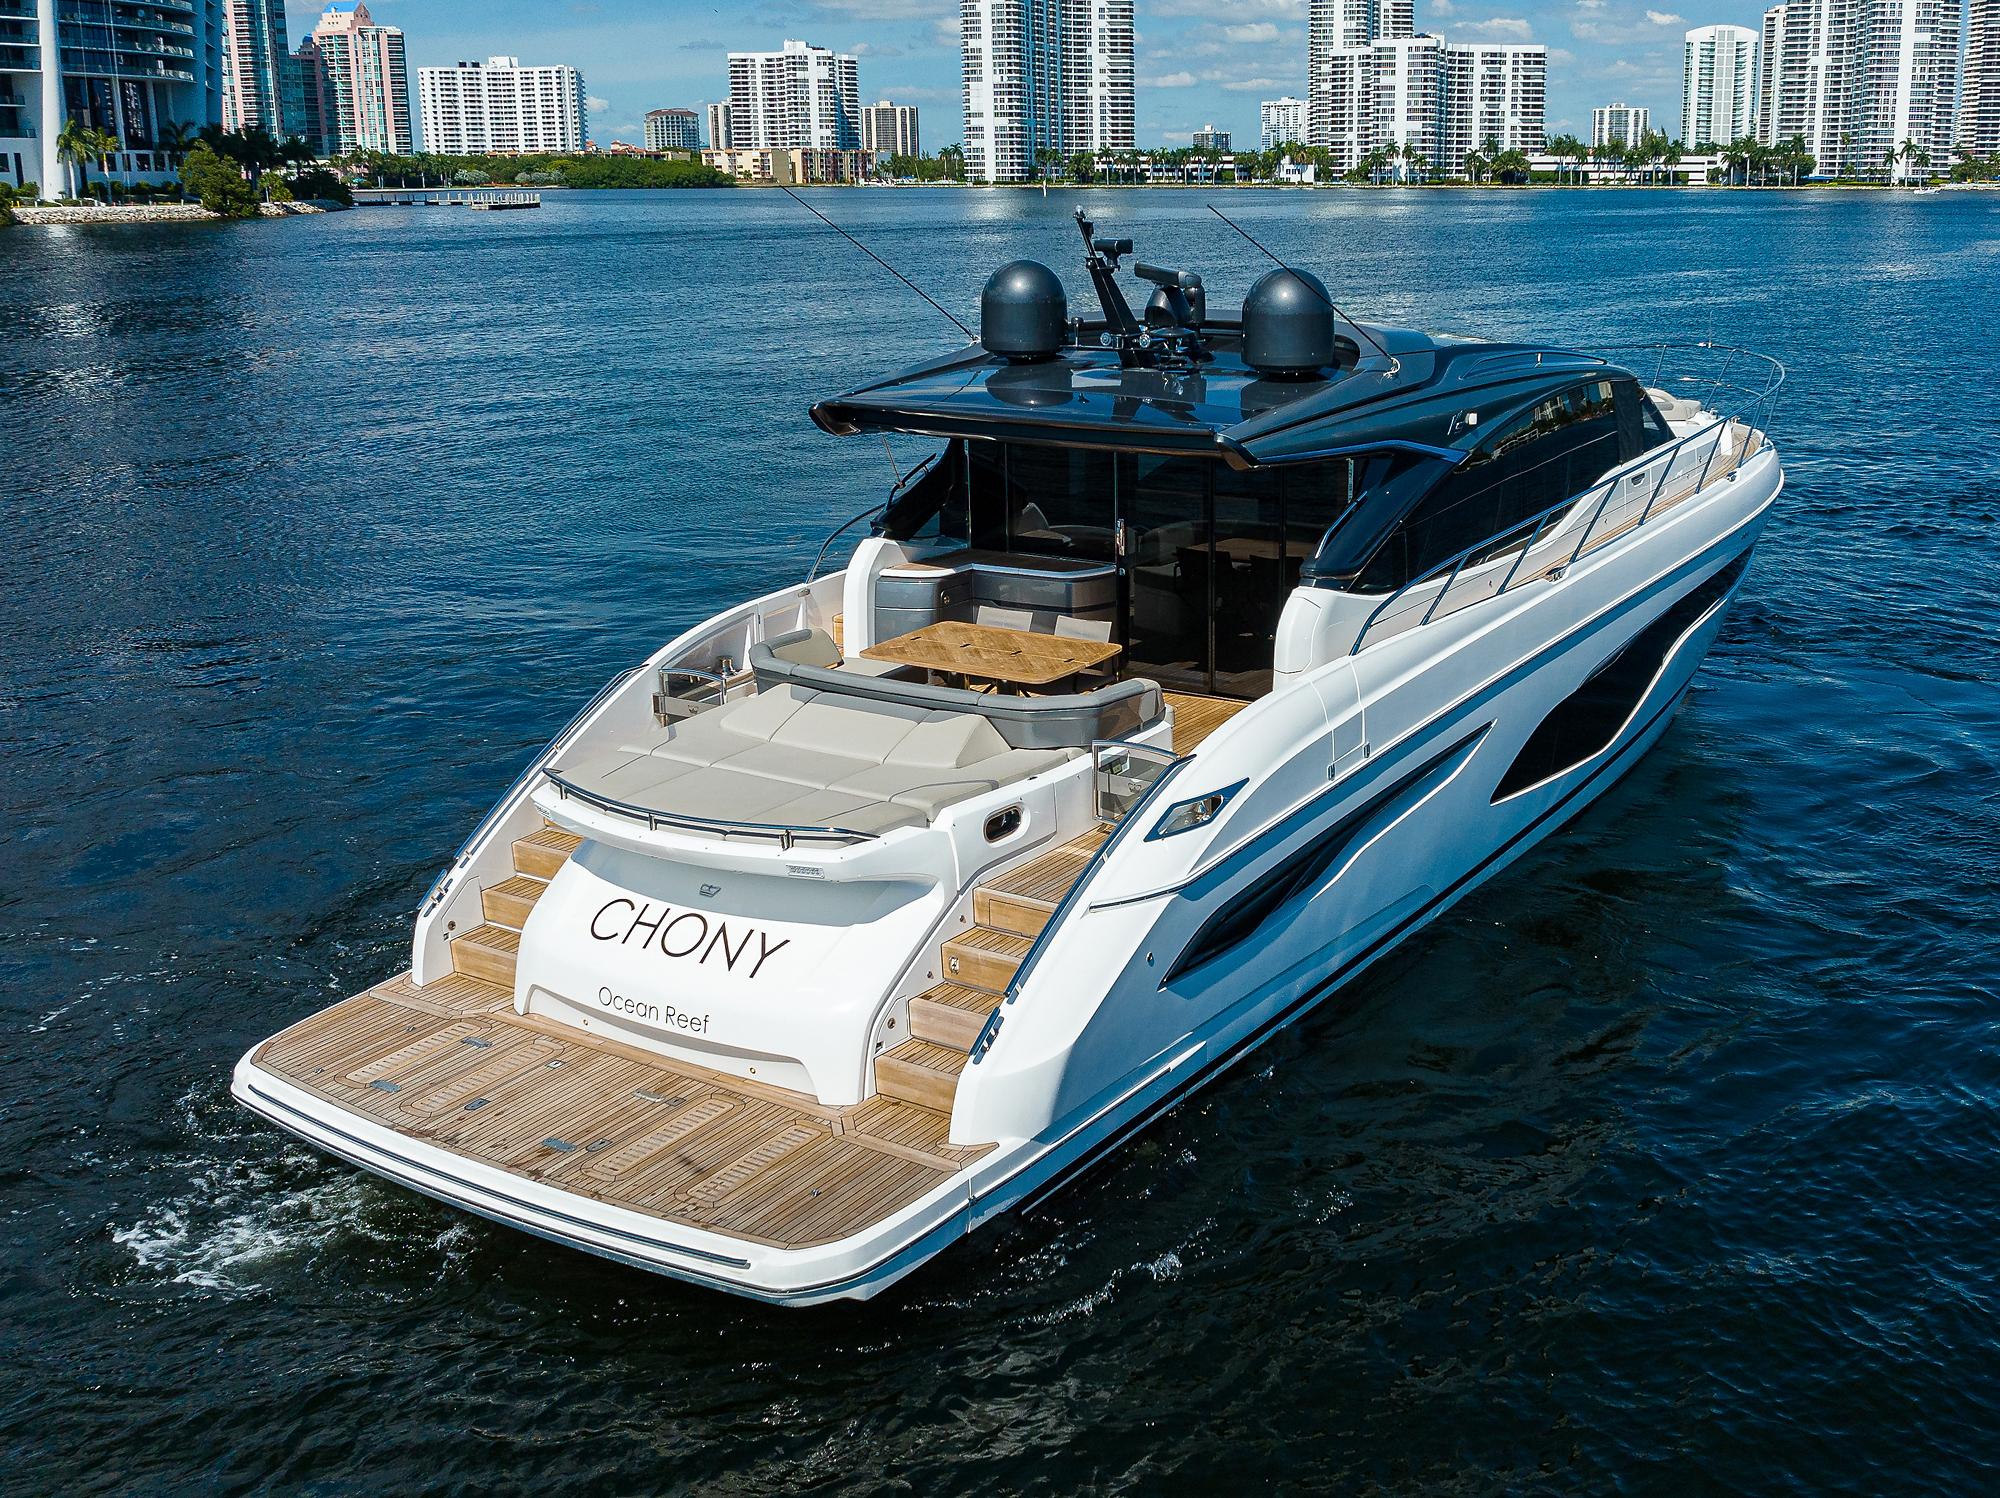 Princess 65 CHONY - Starboard Aft Aerial Profile